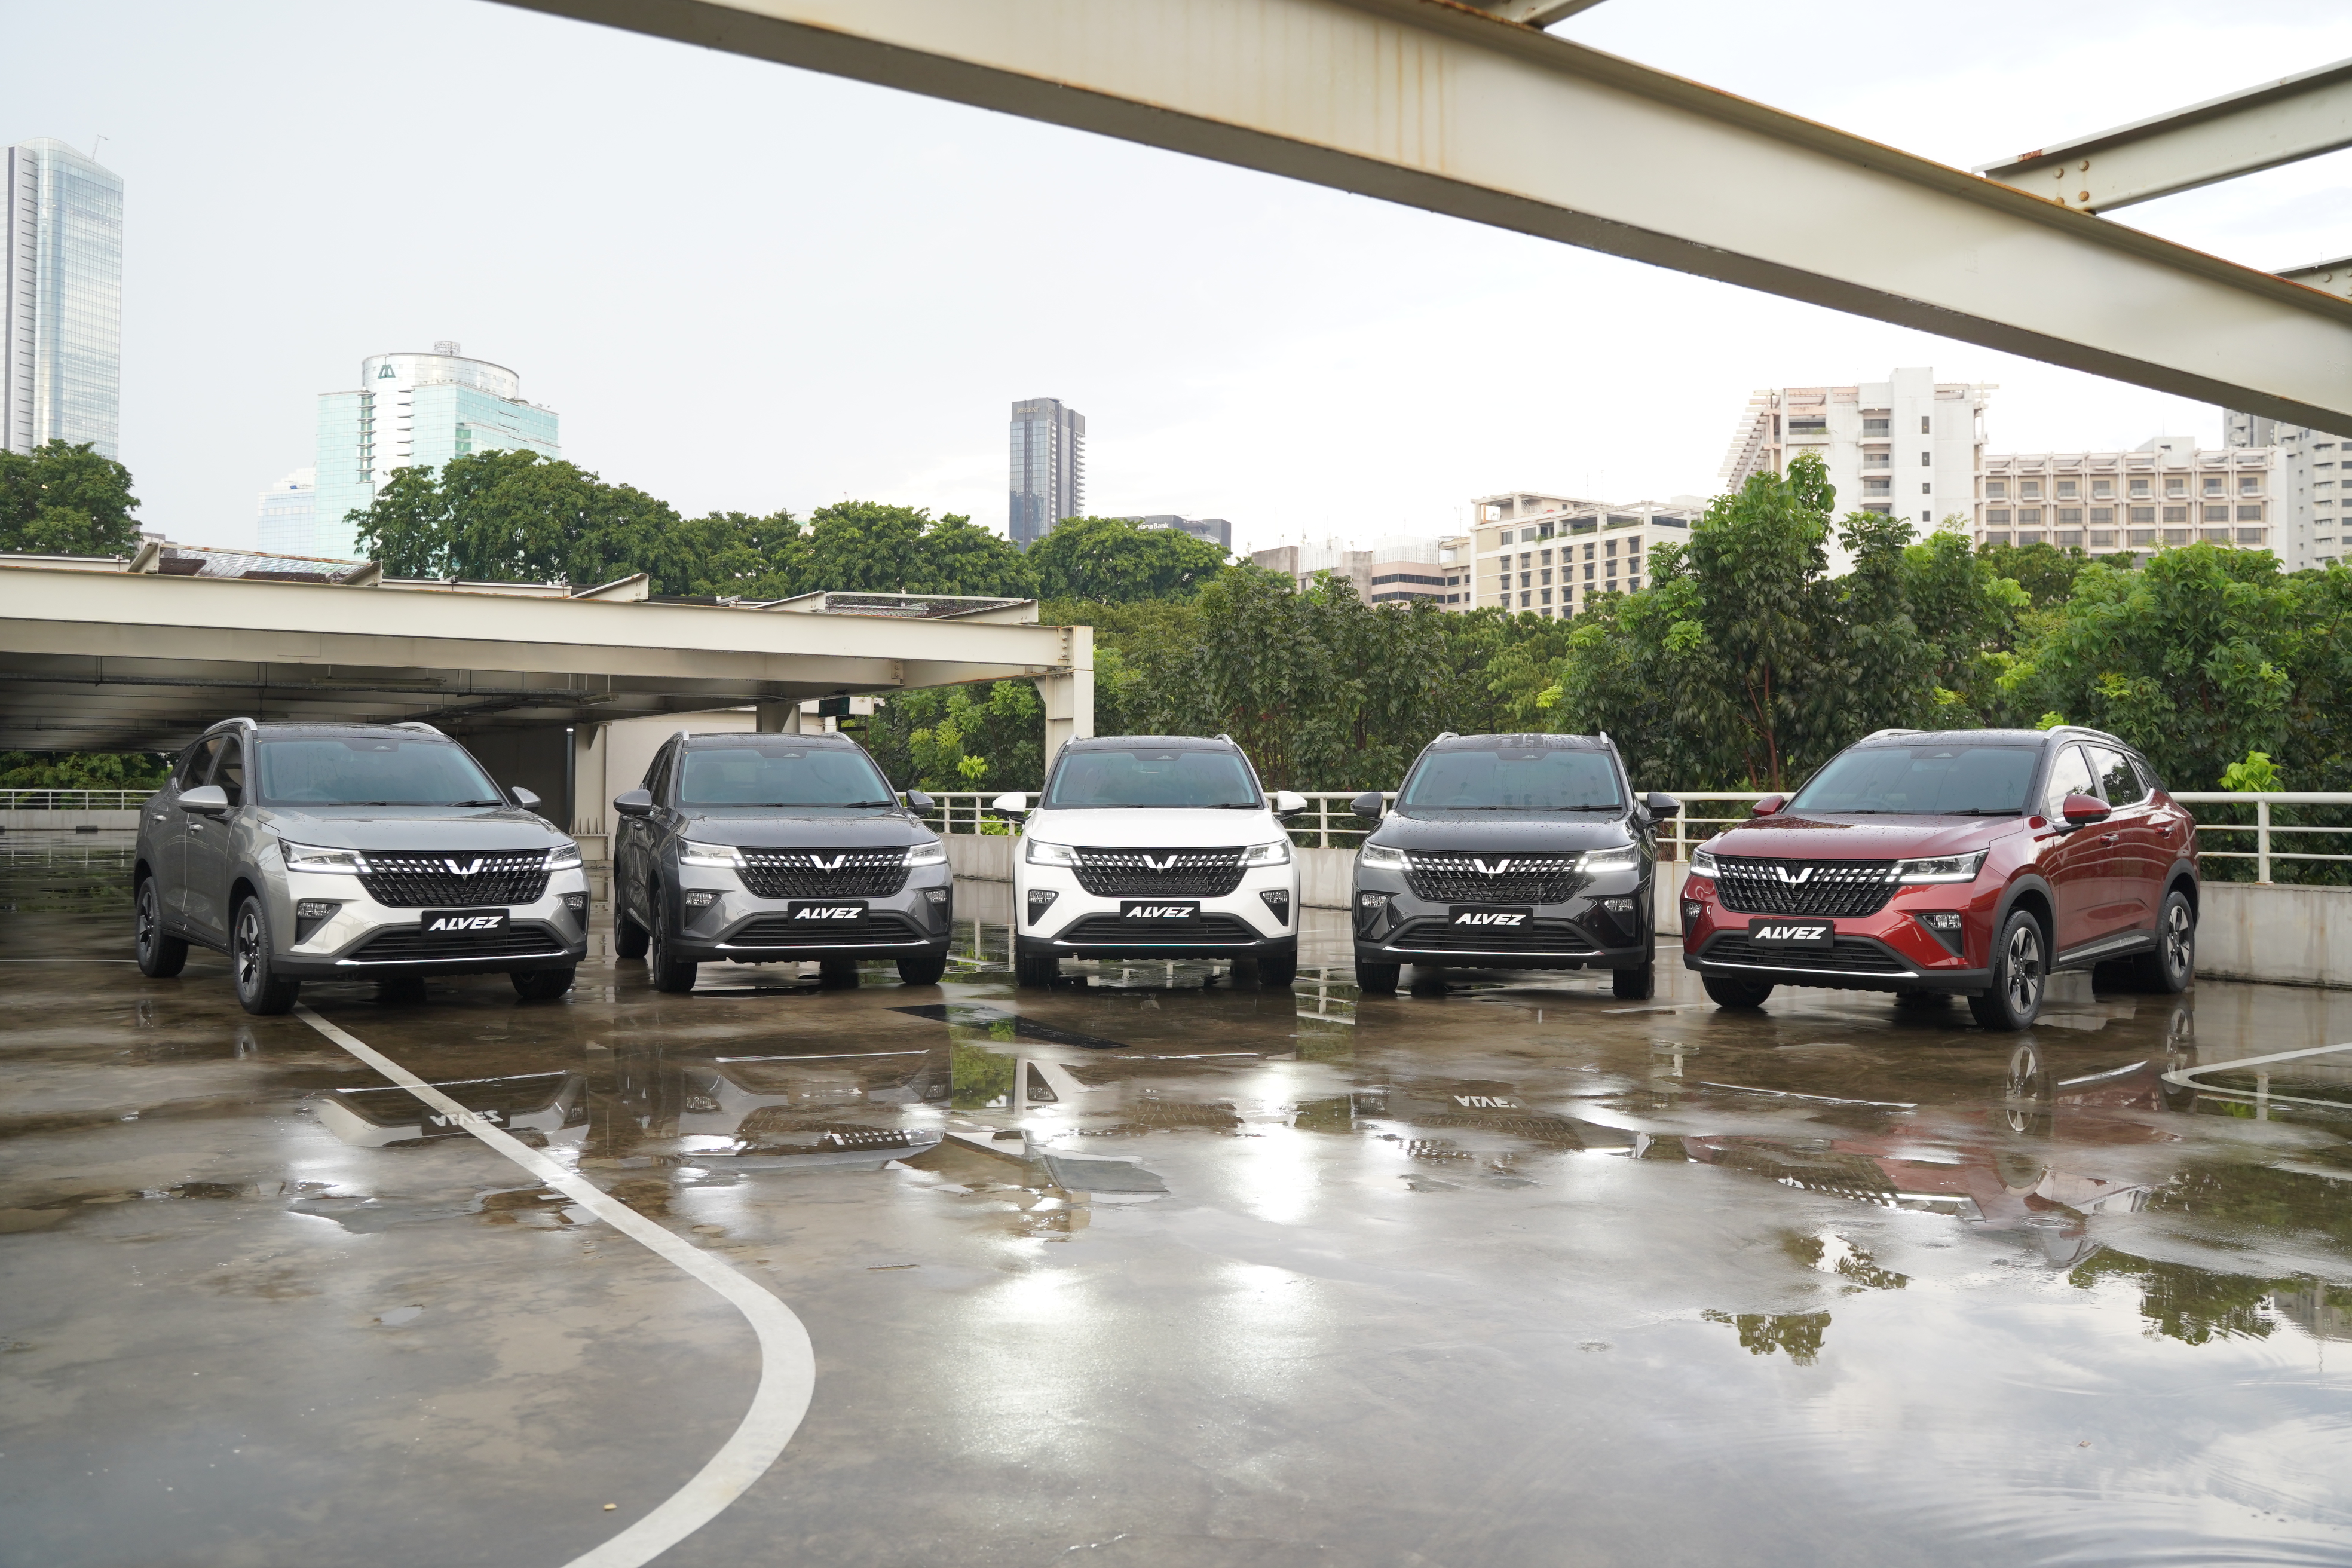 Image Wuling Invites Media Partners to Feel the Sensation of Driving Alvez in the GBK Area